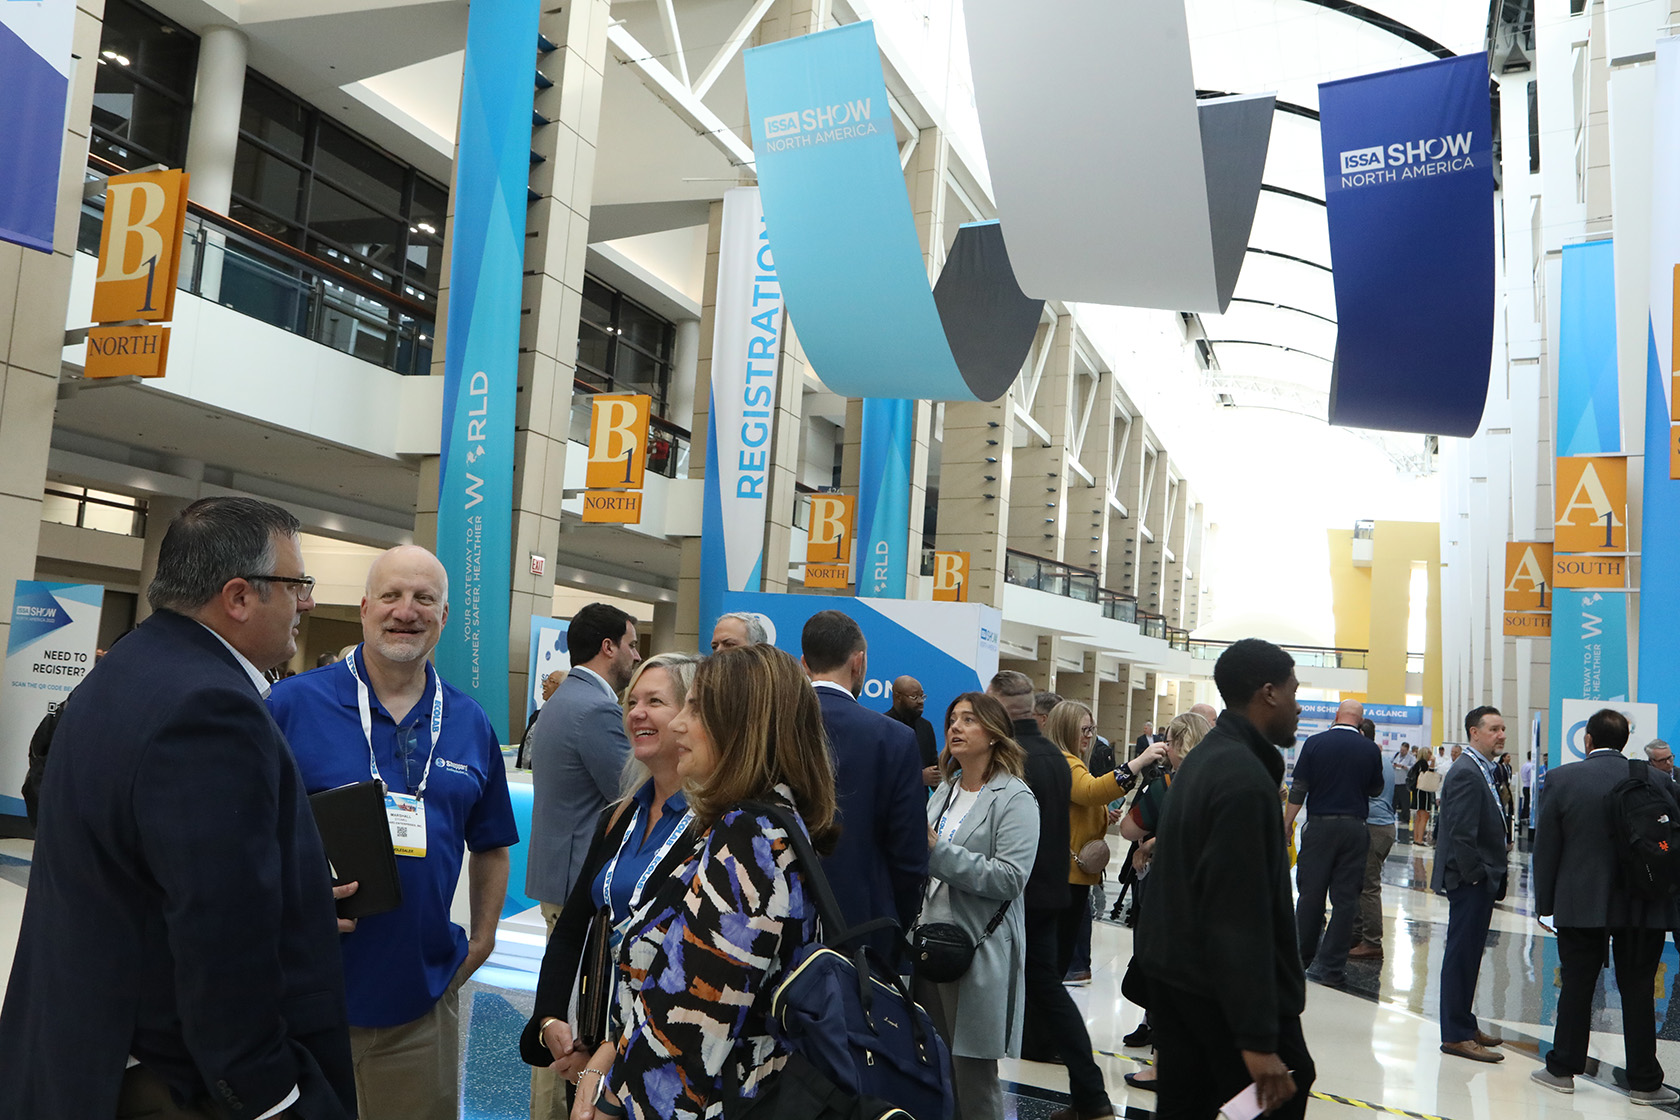 There is a group of people talking in the foreground while others are walking around in the background. ISSA Show North America banners can be seen above them hanging from the ceilings.